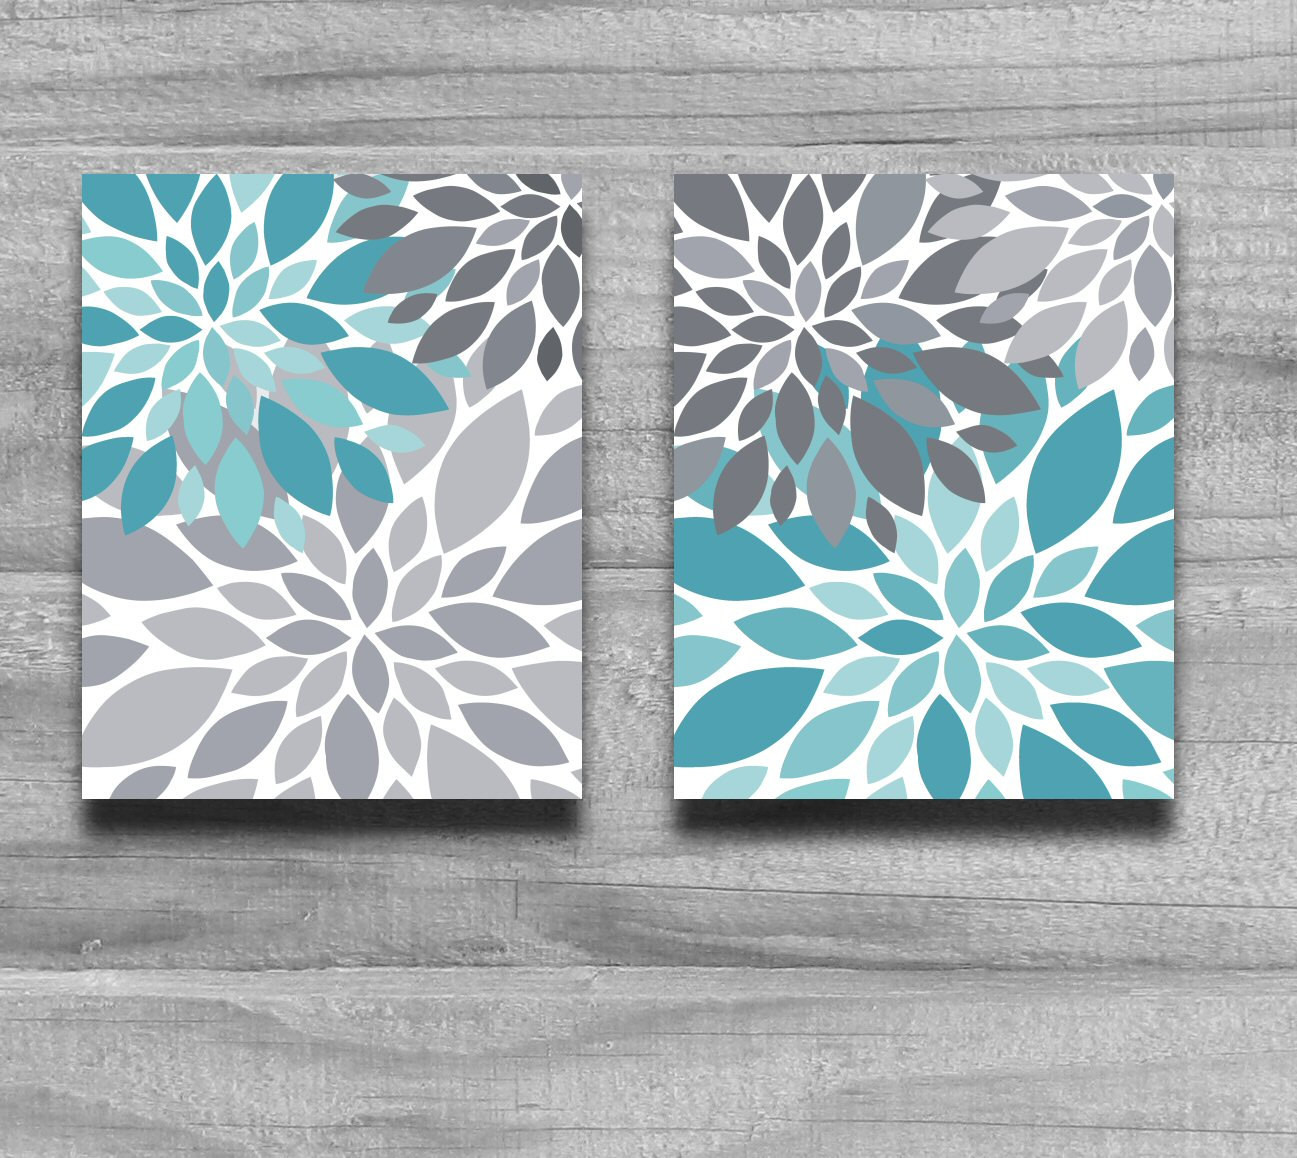 Turquoise Bathroom Wall Decor
 Turquoise Gray Flower Burst Print Set Home by